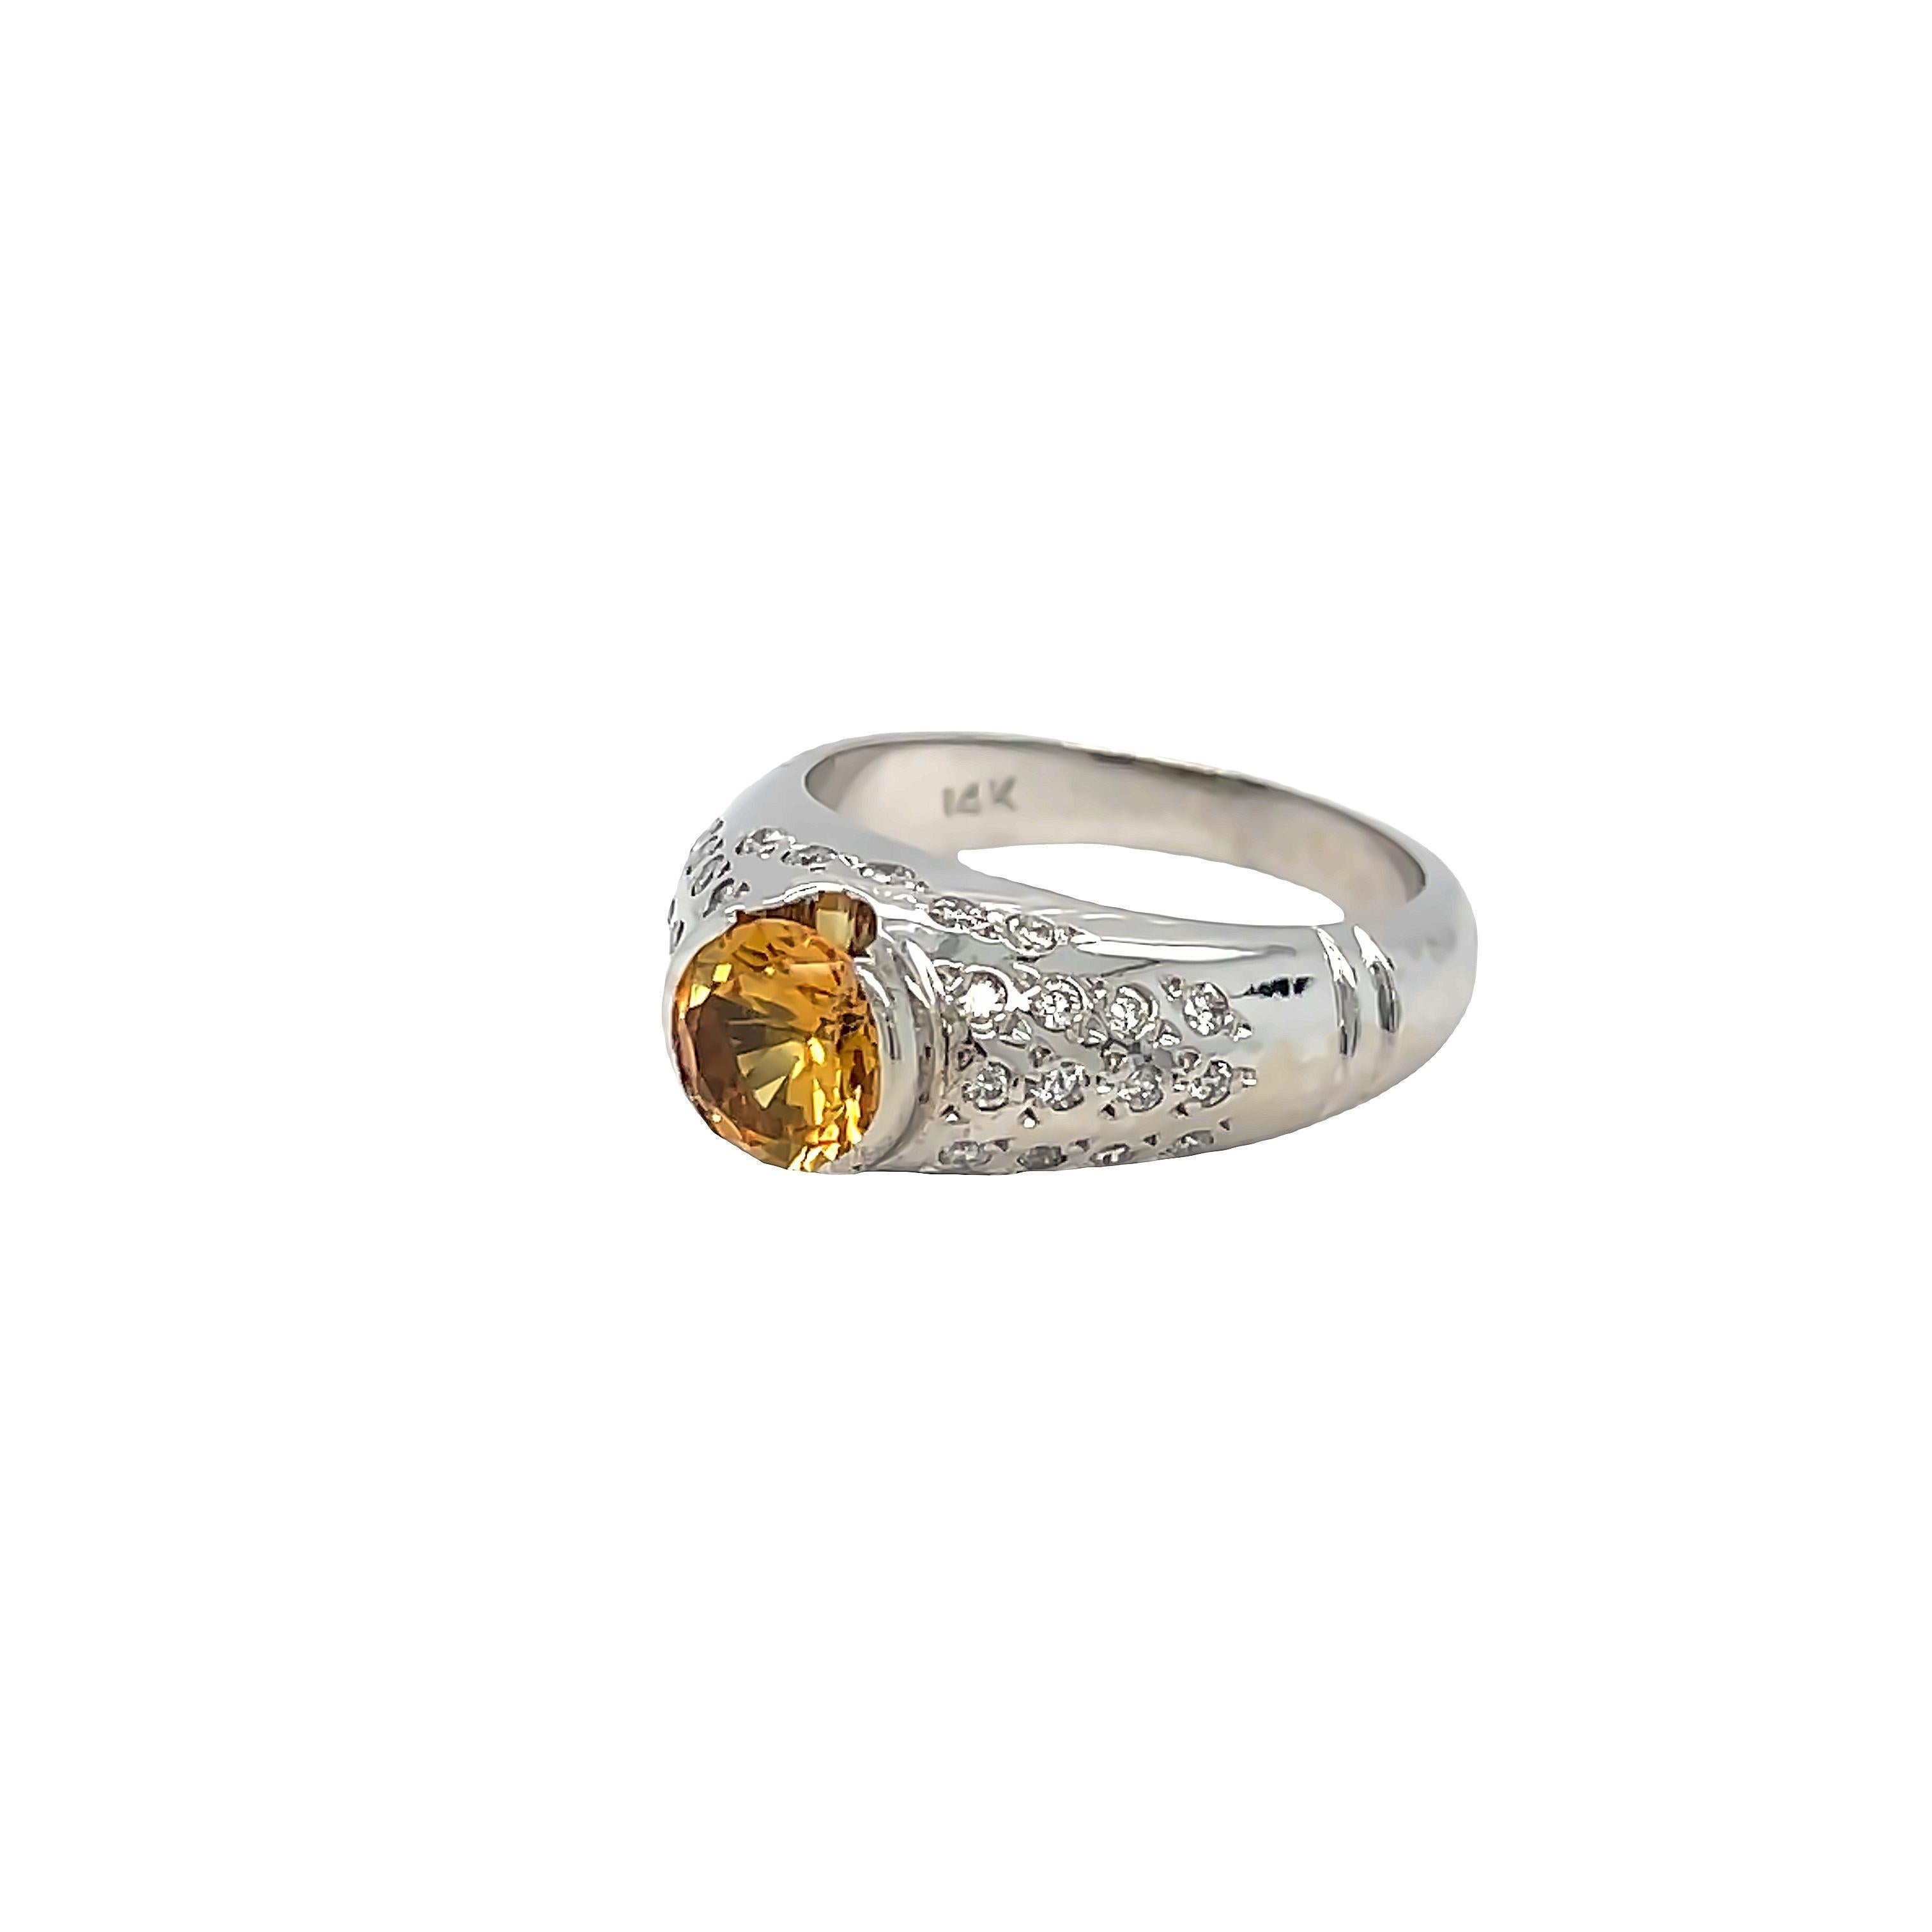 Elegant and contemporary, this 14K White Gold Citrine Diamond Ring features a stunning round Citrine weighing approximately 1.30 carats. Irradated Citrine is beautifully showcased in a raised half-bezel setting, complemented by a dome setting